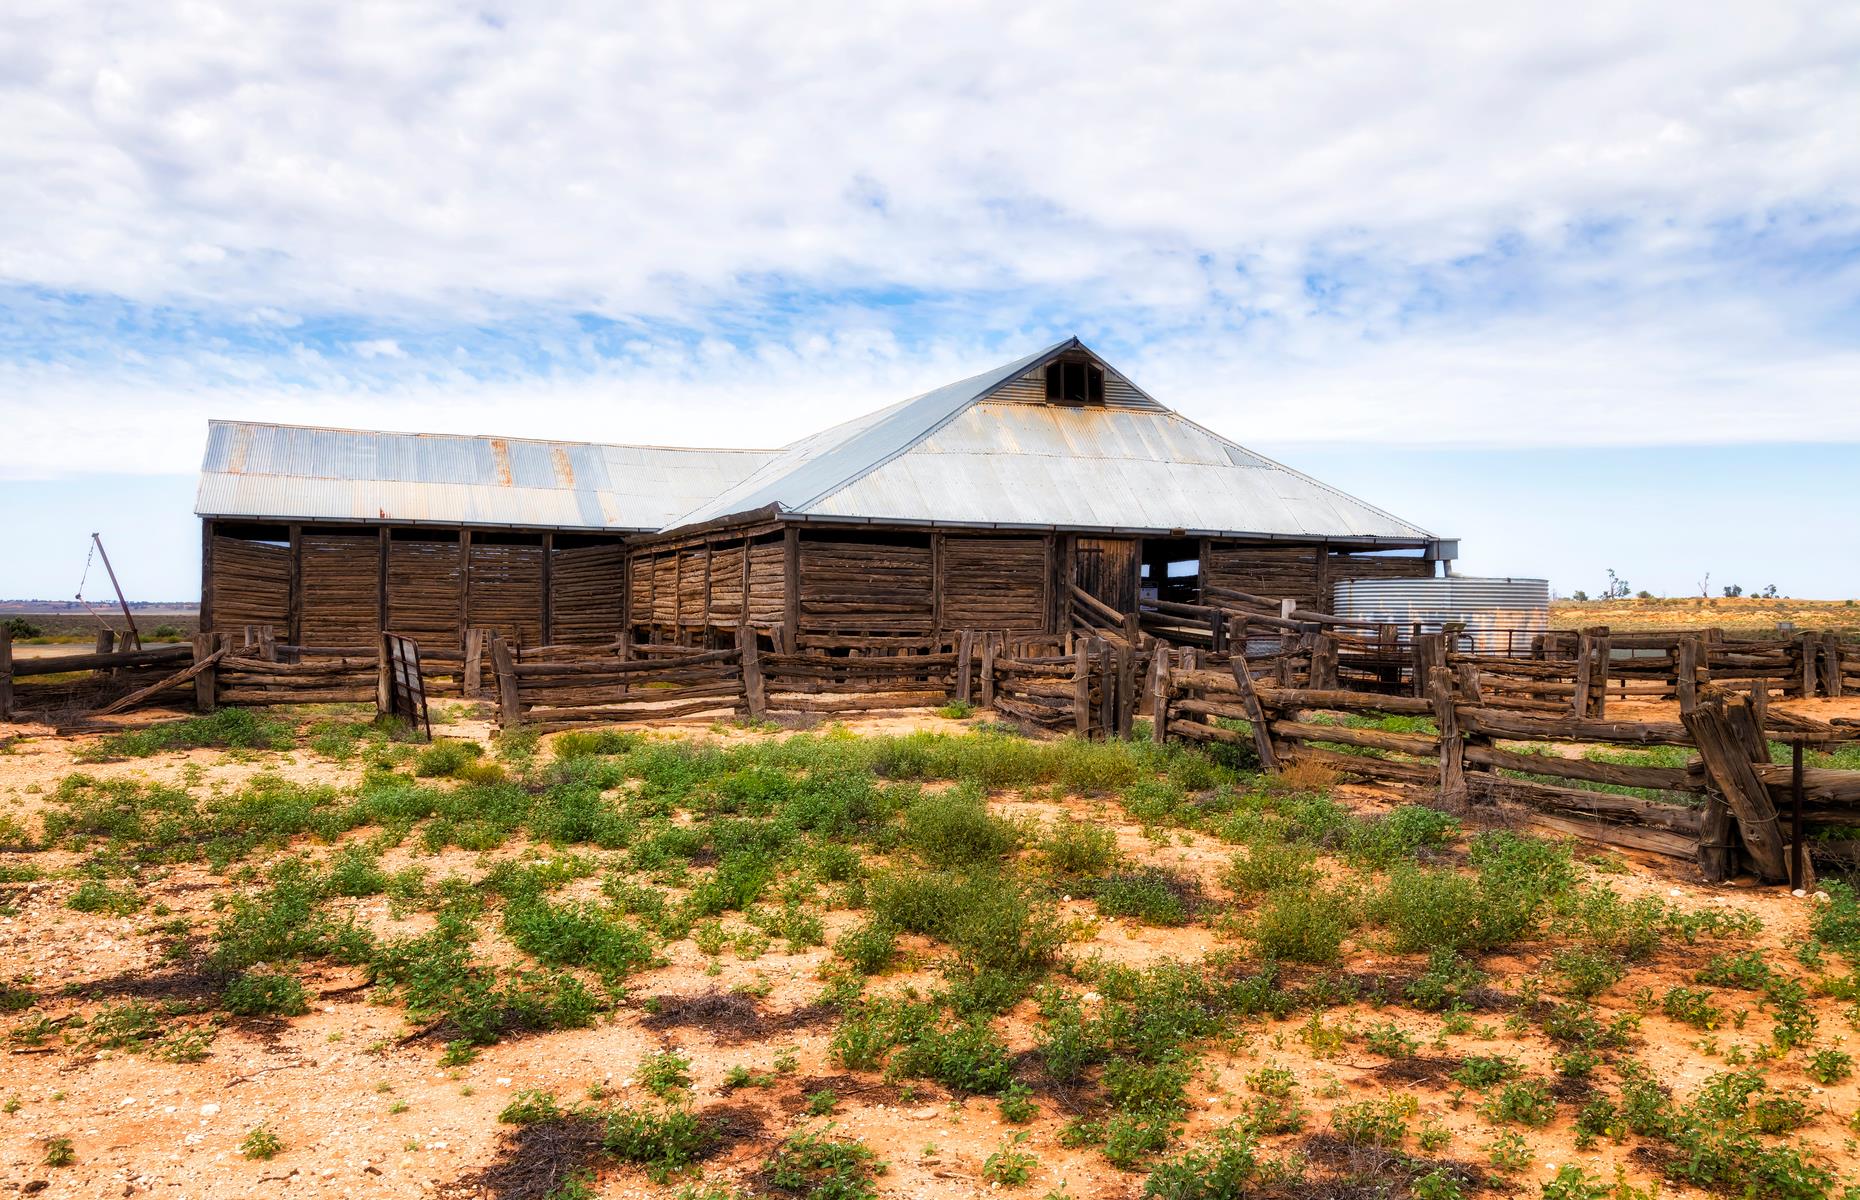 Learn about the pastoral heritage of this remote part of regional southwestern New South Wales in Mungo National Park. An old woolshed, built in 1869 as part of the historic Gol Gol pastoral station, can be explored. It was made from local long cypress pine trees and would have had capacity for 18 men to hand shear over 50,000 sheep. The park also contains the intriguing remains of the long-abandoned Zanci Homestead.